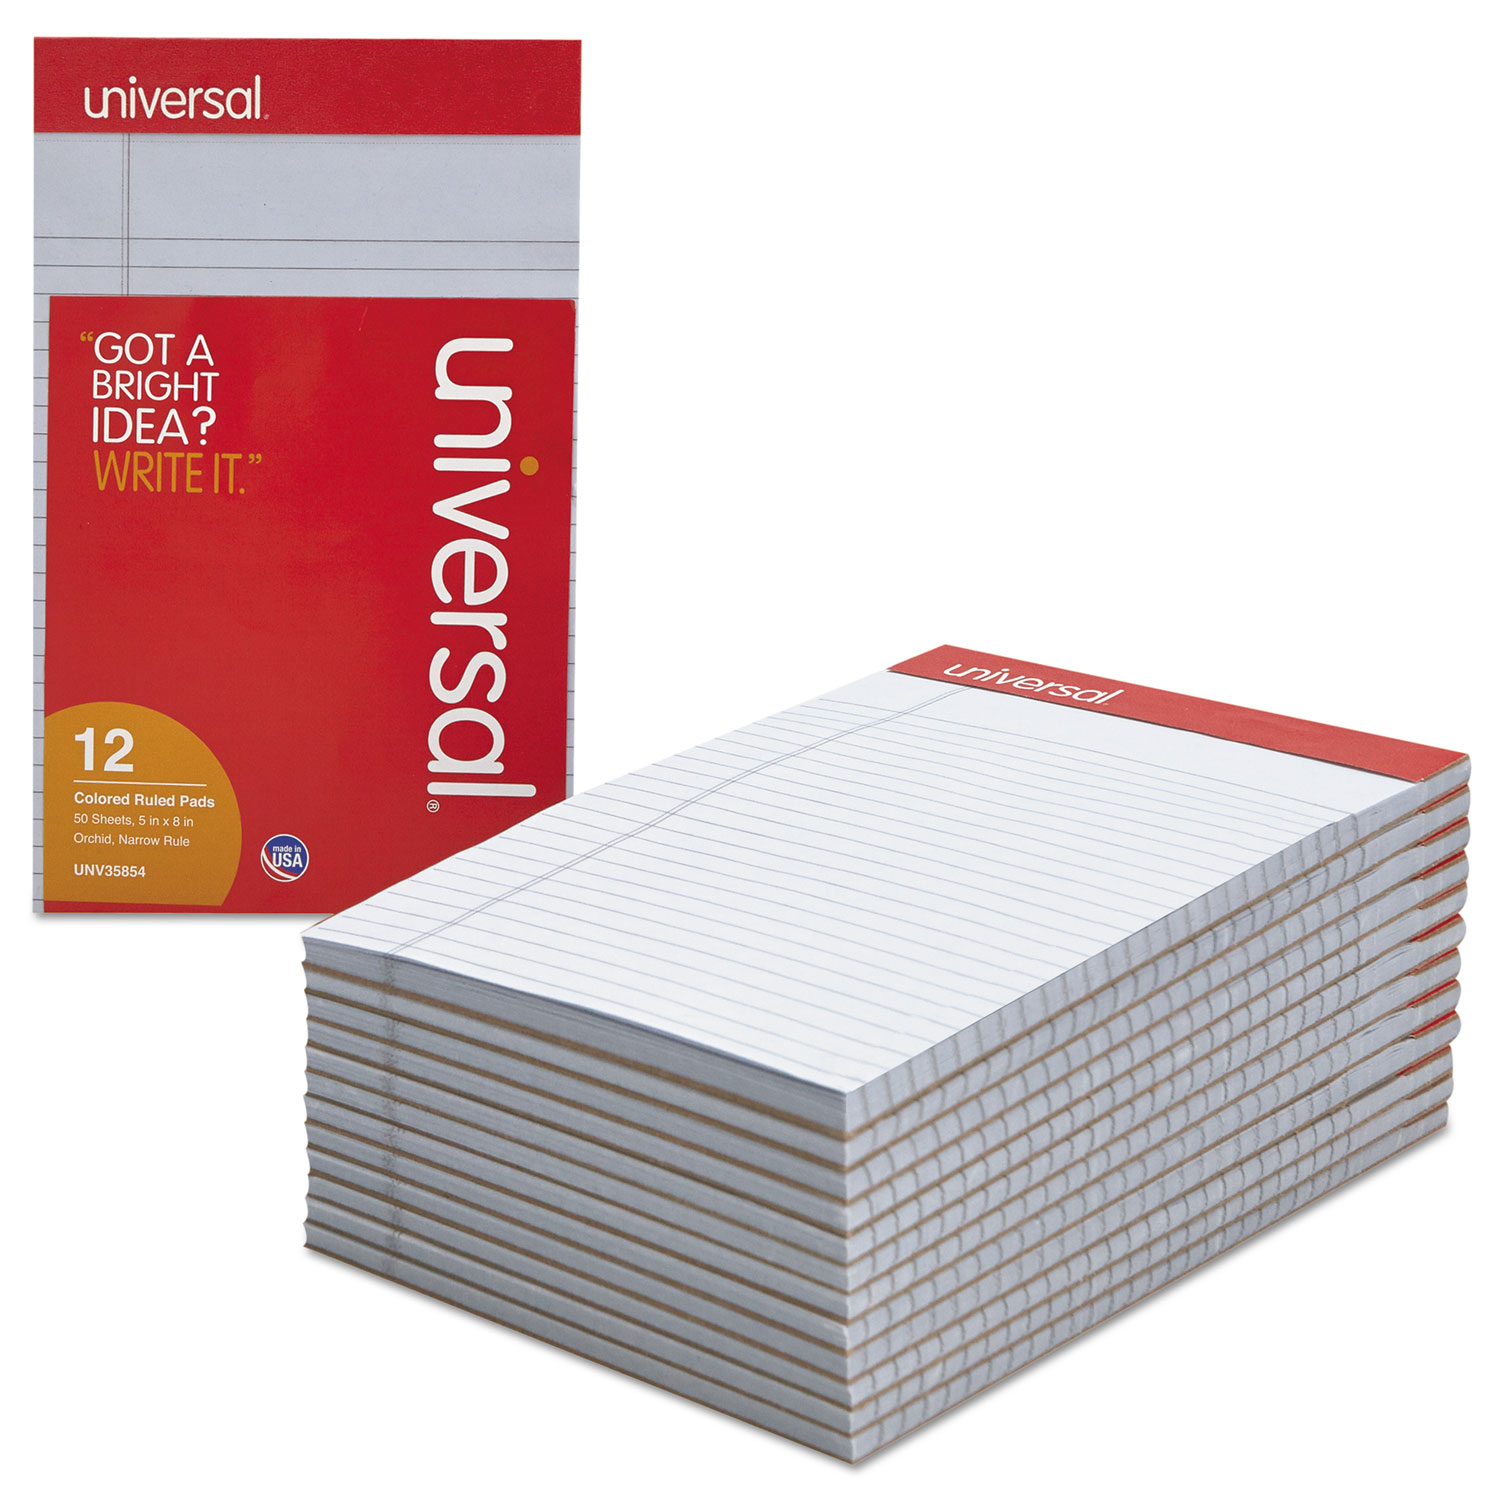  Universal UNV35854 Colored Perforated Writing Pads, Narrow Rule, 5 x 8, Orchid, 50 Sheets, Dozen (UNV35854) 